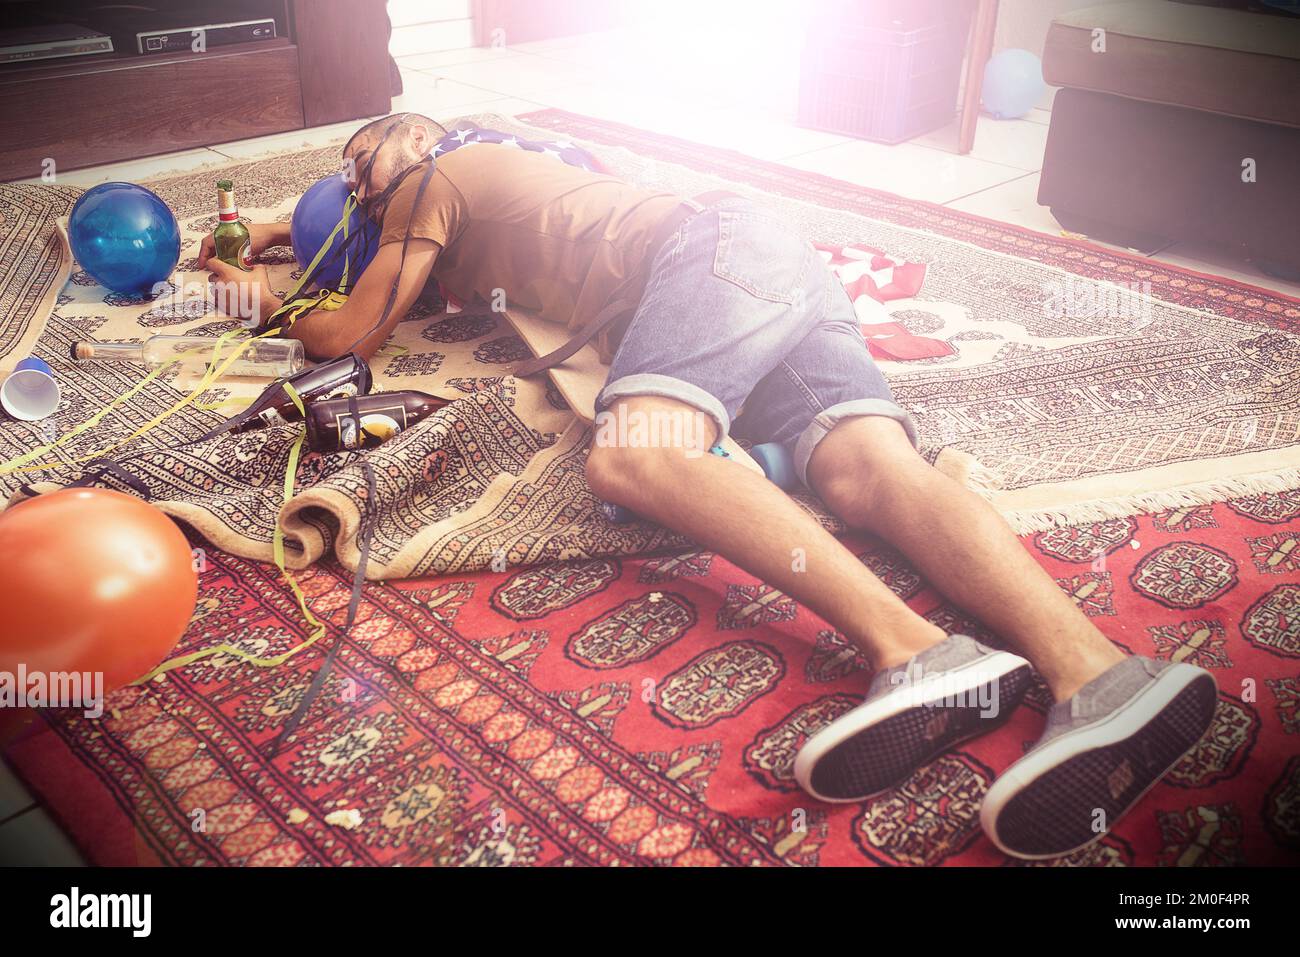 Party, drunk and hangover with a man sleeping on a living room floor after new year celebration. Beer, college and hungover with a male passed out Stock Photo